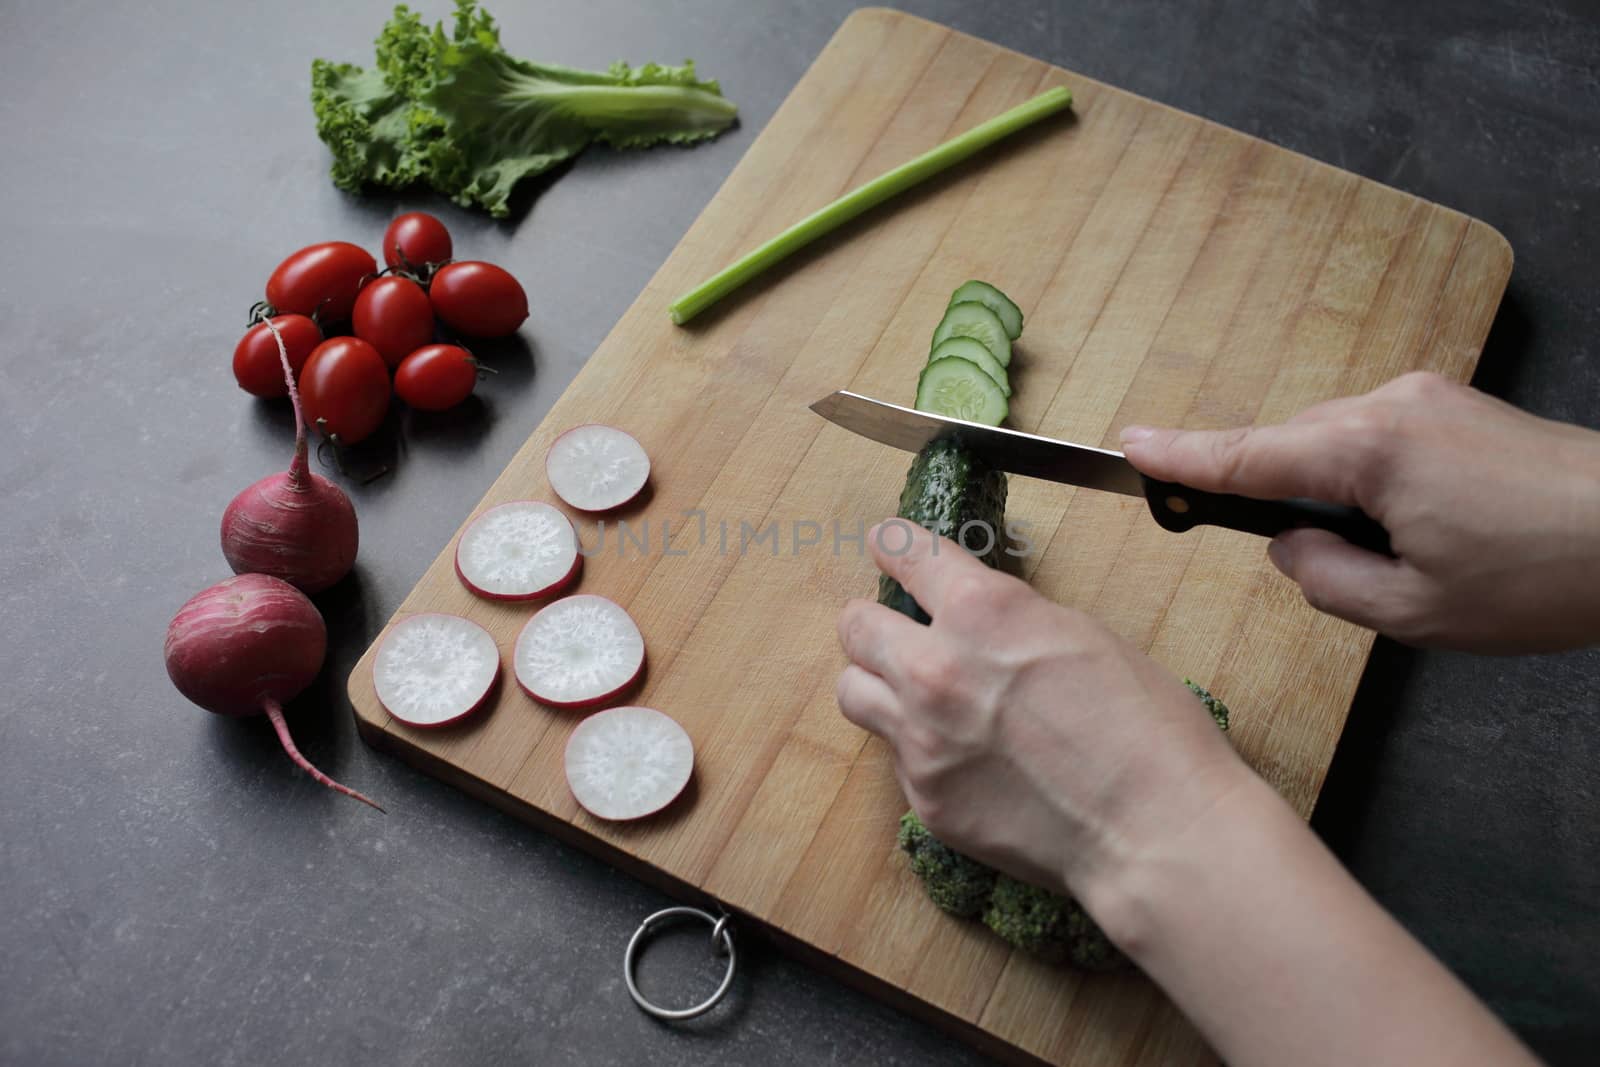 Hands cut cucumber on a cutting board on a gray table. Fresh vegetables, tomatoes, lettuce, broccoli, radishes lie nearby